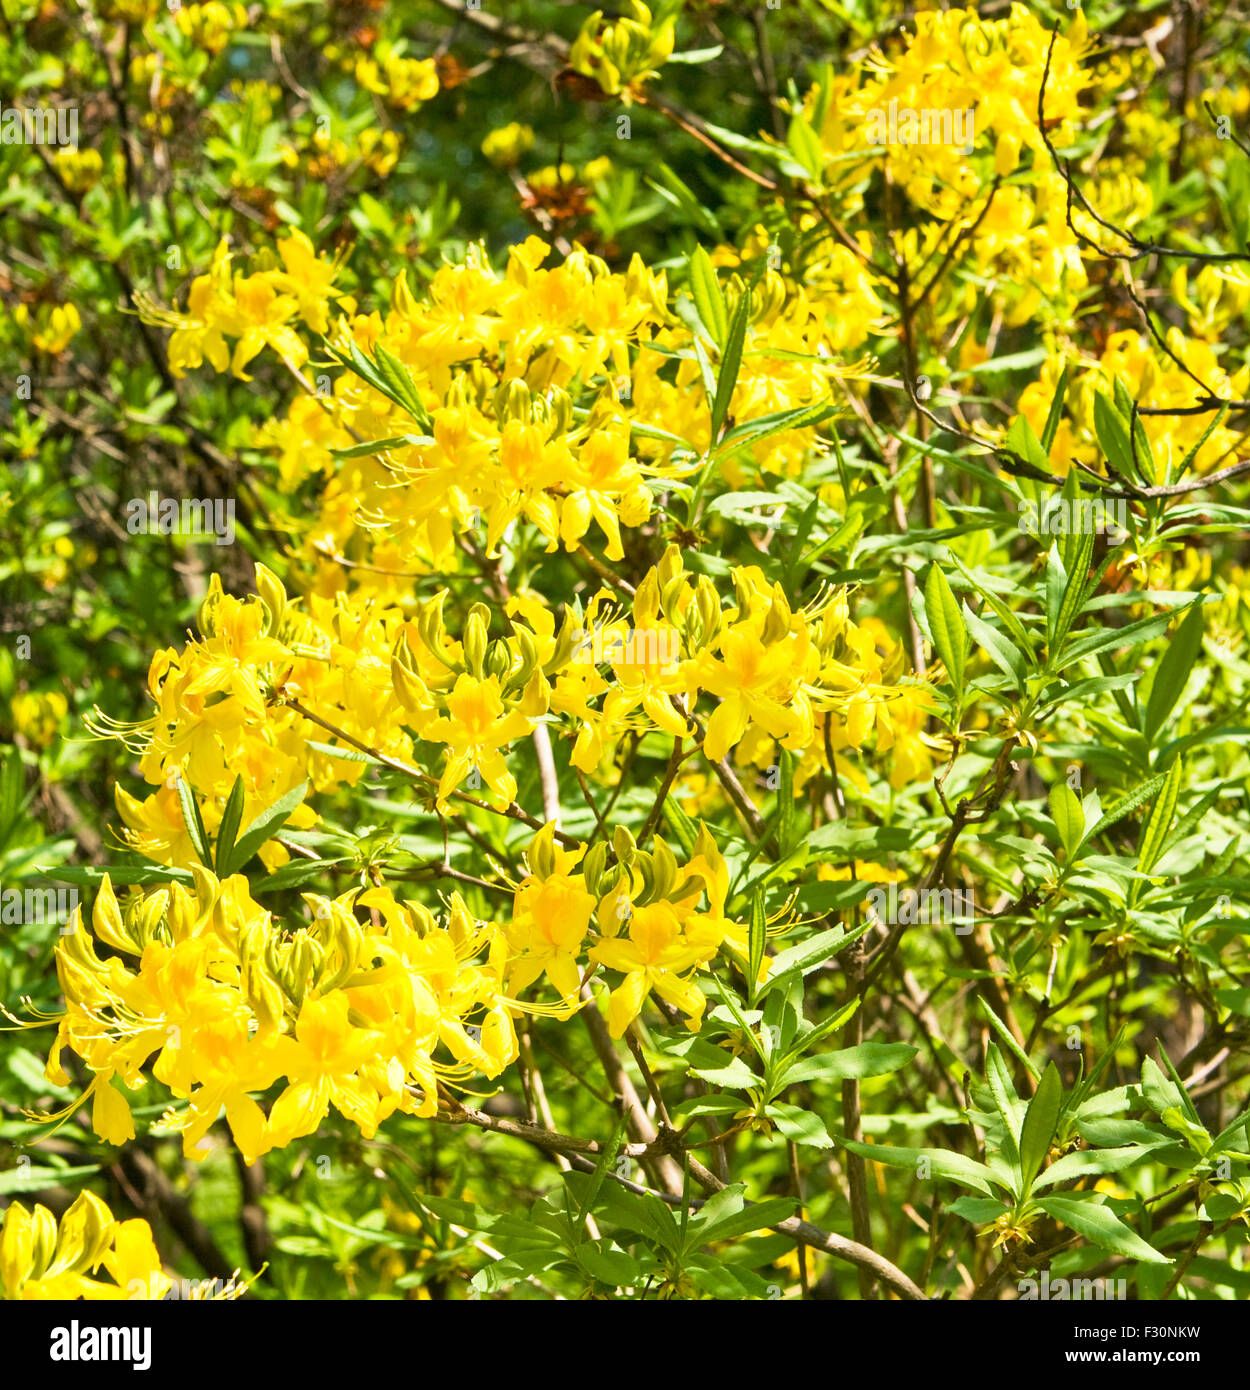 Branch of shrub rhododendron with yellow flowers. Stock Photo